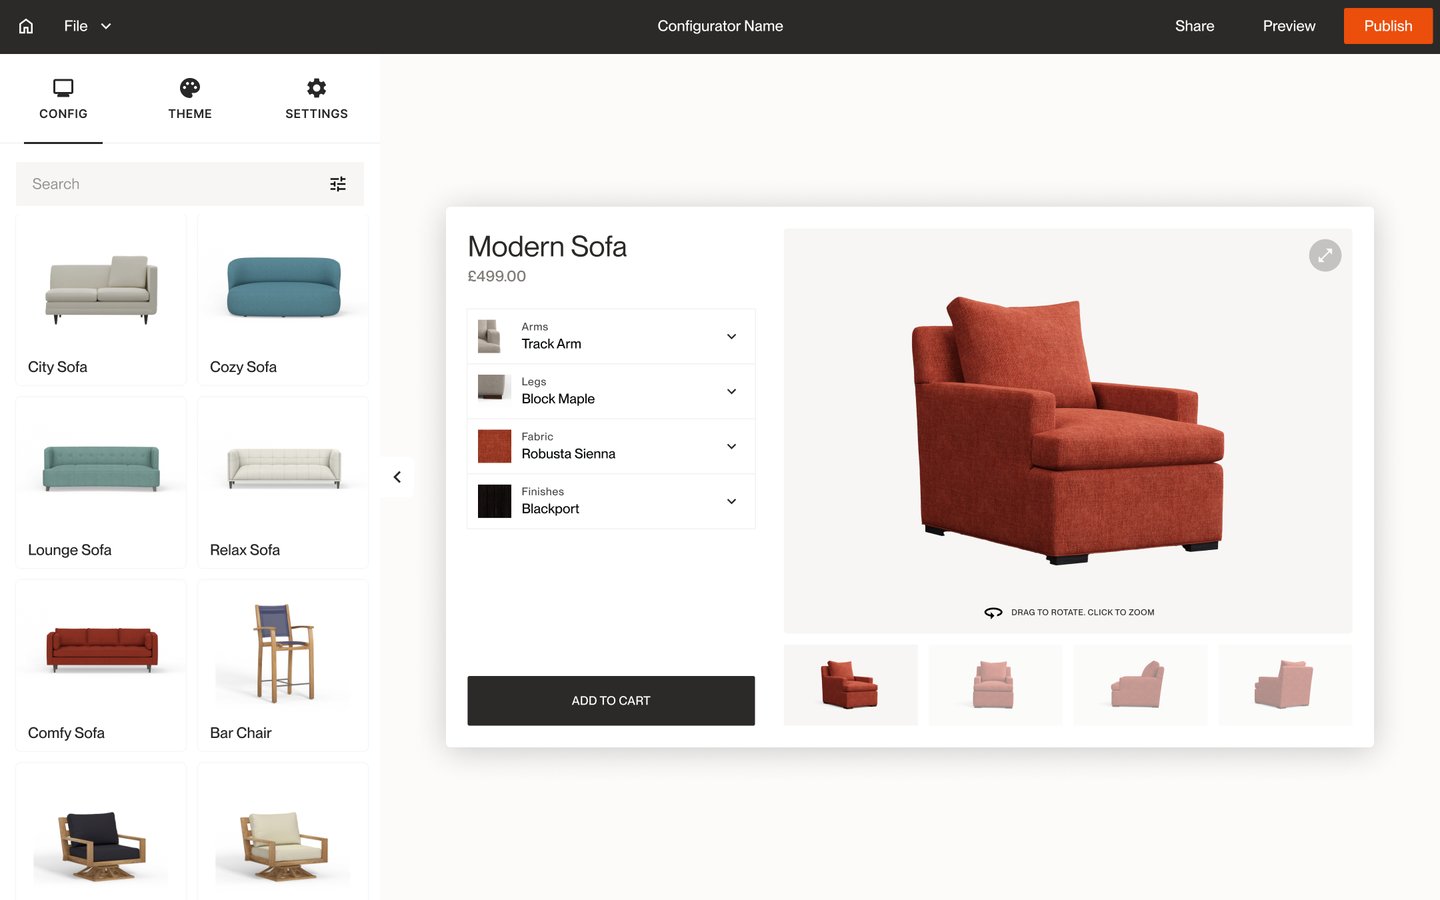 Empowering Customers: 3D Configurators Are Reshaping The Way We Shop